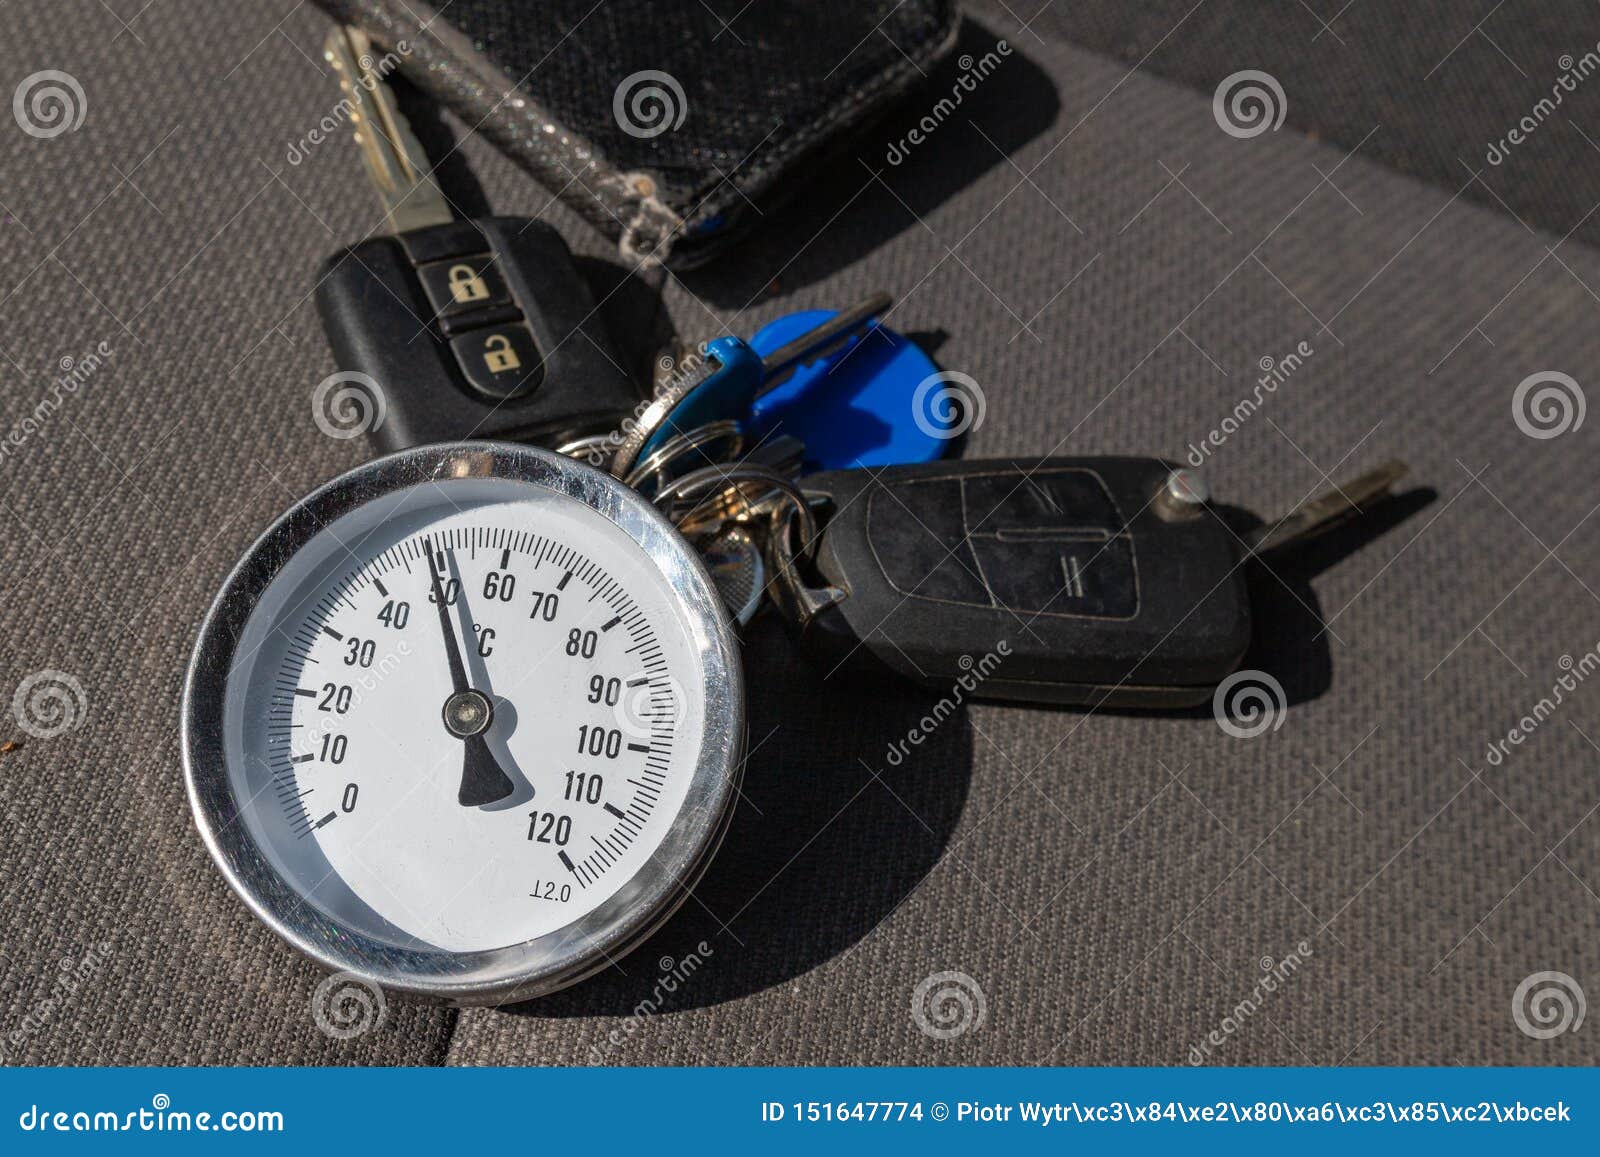 Thermometre voiture